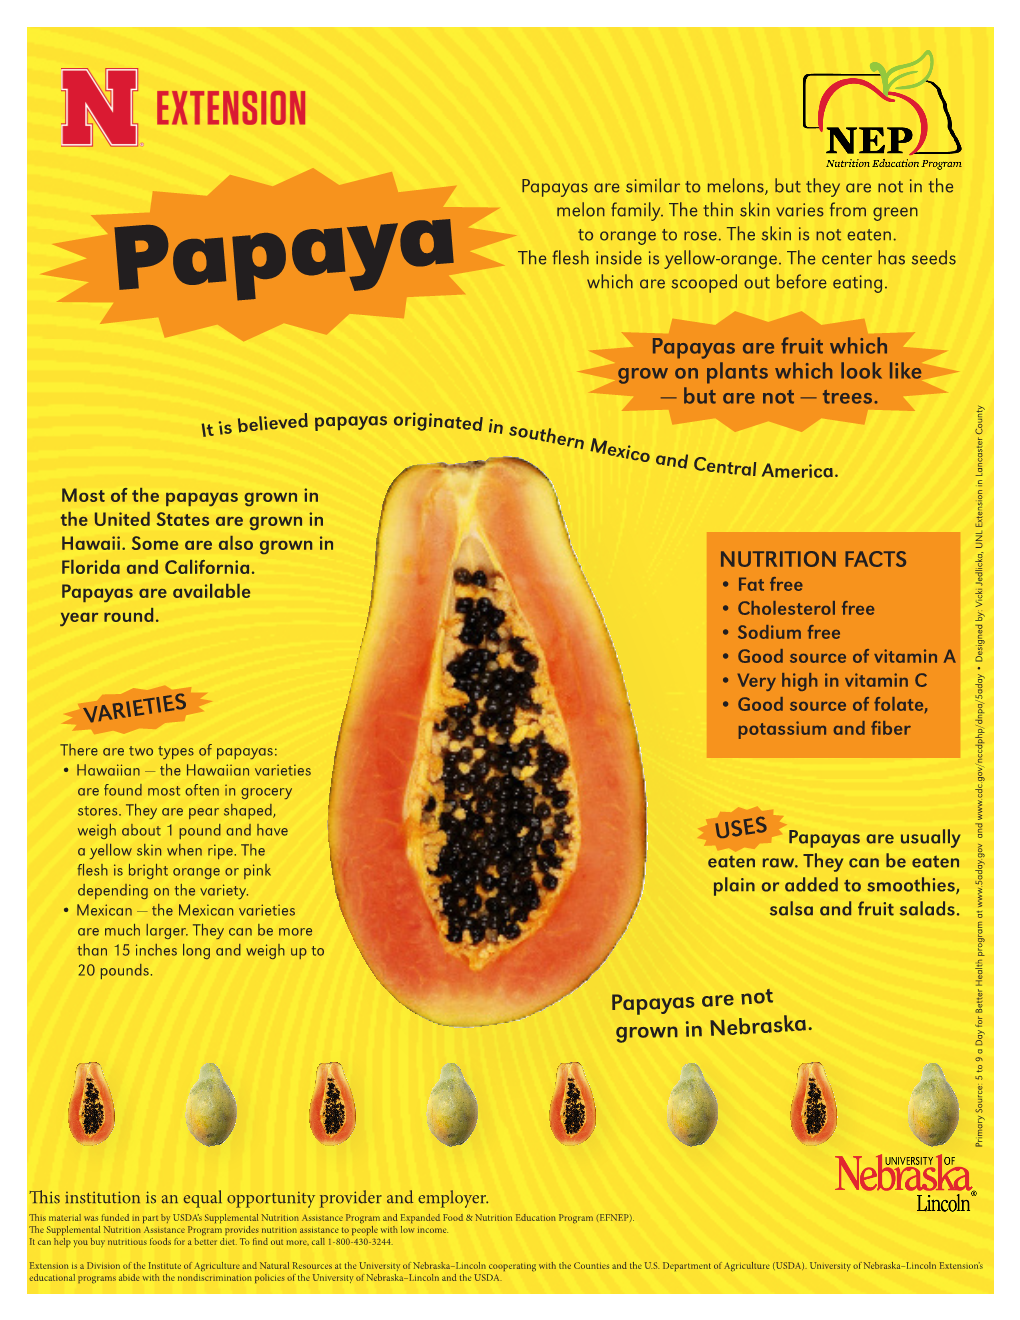 Papayas Are Similar to Melons, but They Are Not in the Melon Family